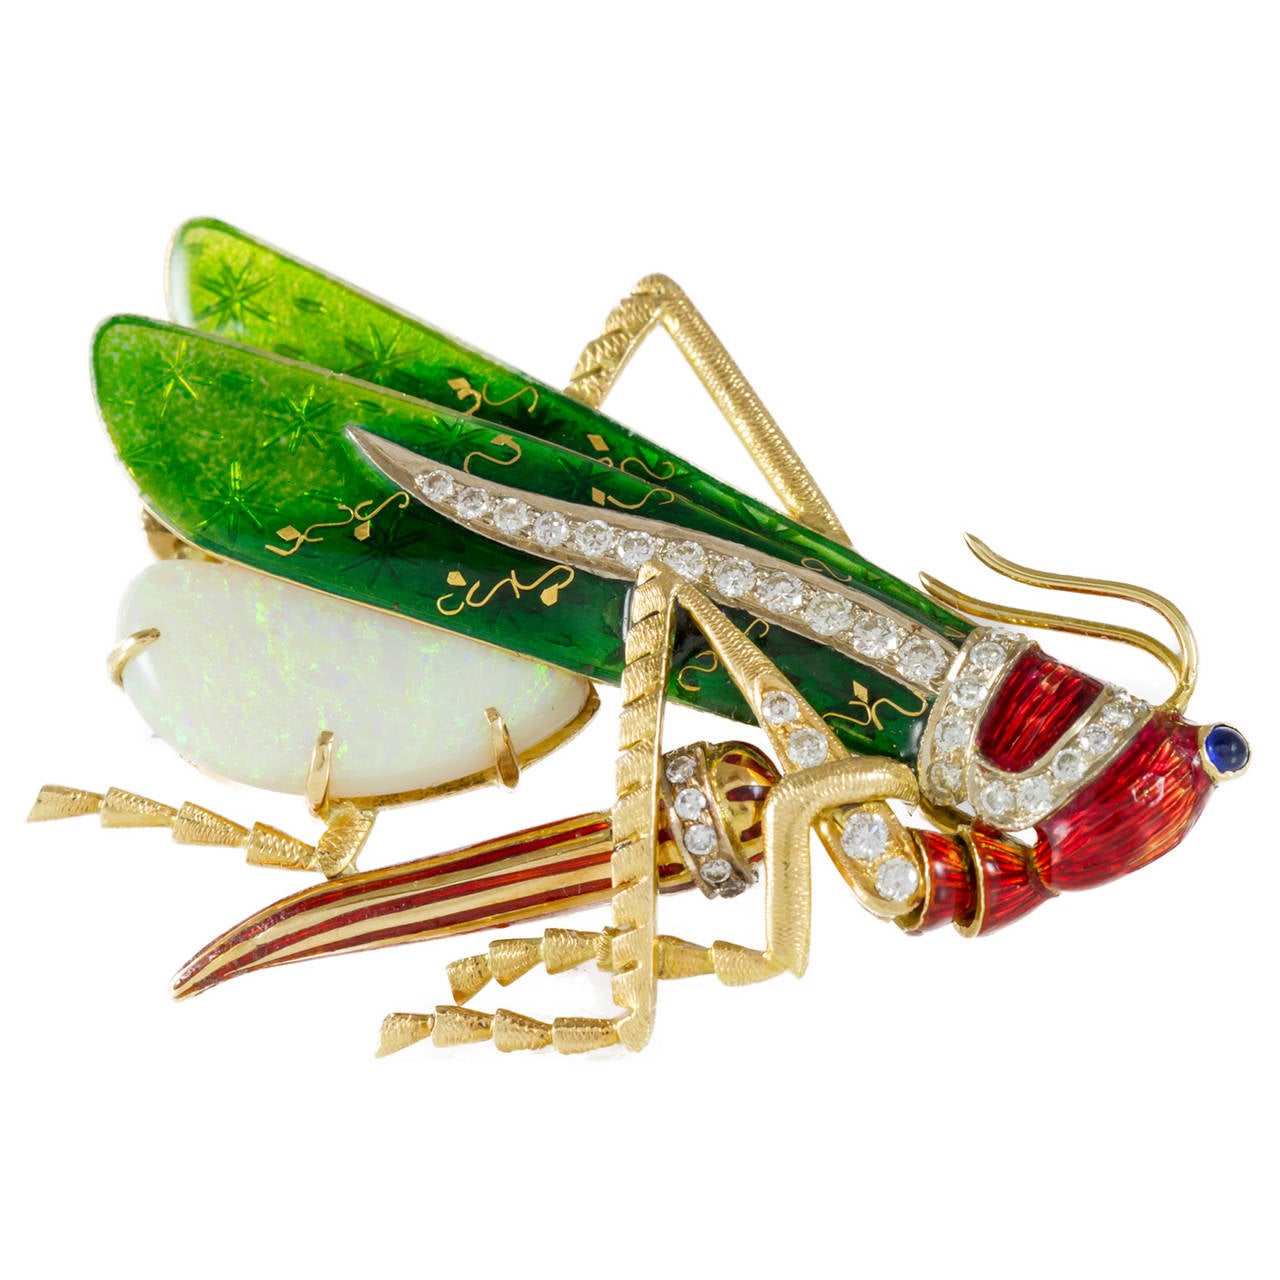 Lady's 18K yellow gold grasshopper brooch prong-set with one (1) Asymmetrical Cabochon cut Opal, bead-set with thirty three (33) Round Brilliant cut Diamonds, bezel-set with one (1) Round Cabochon cut Sapphire eye (1.50 mm) and decorated with green